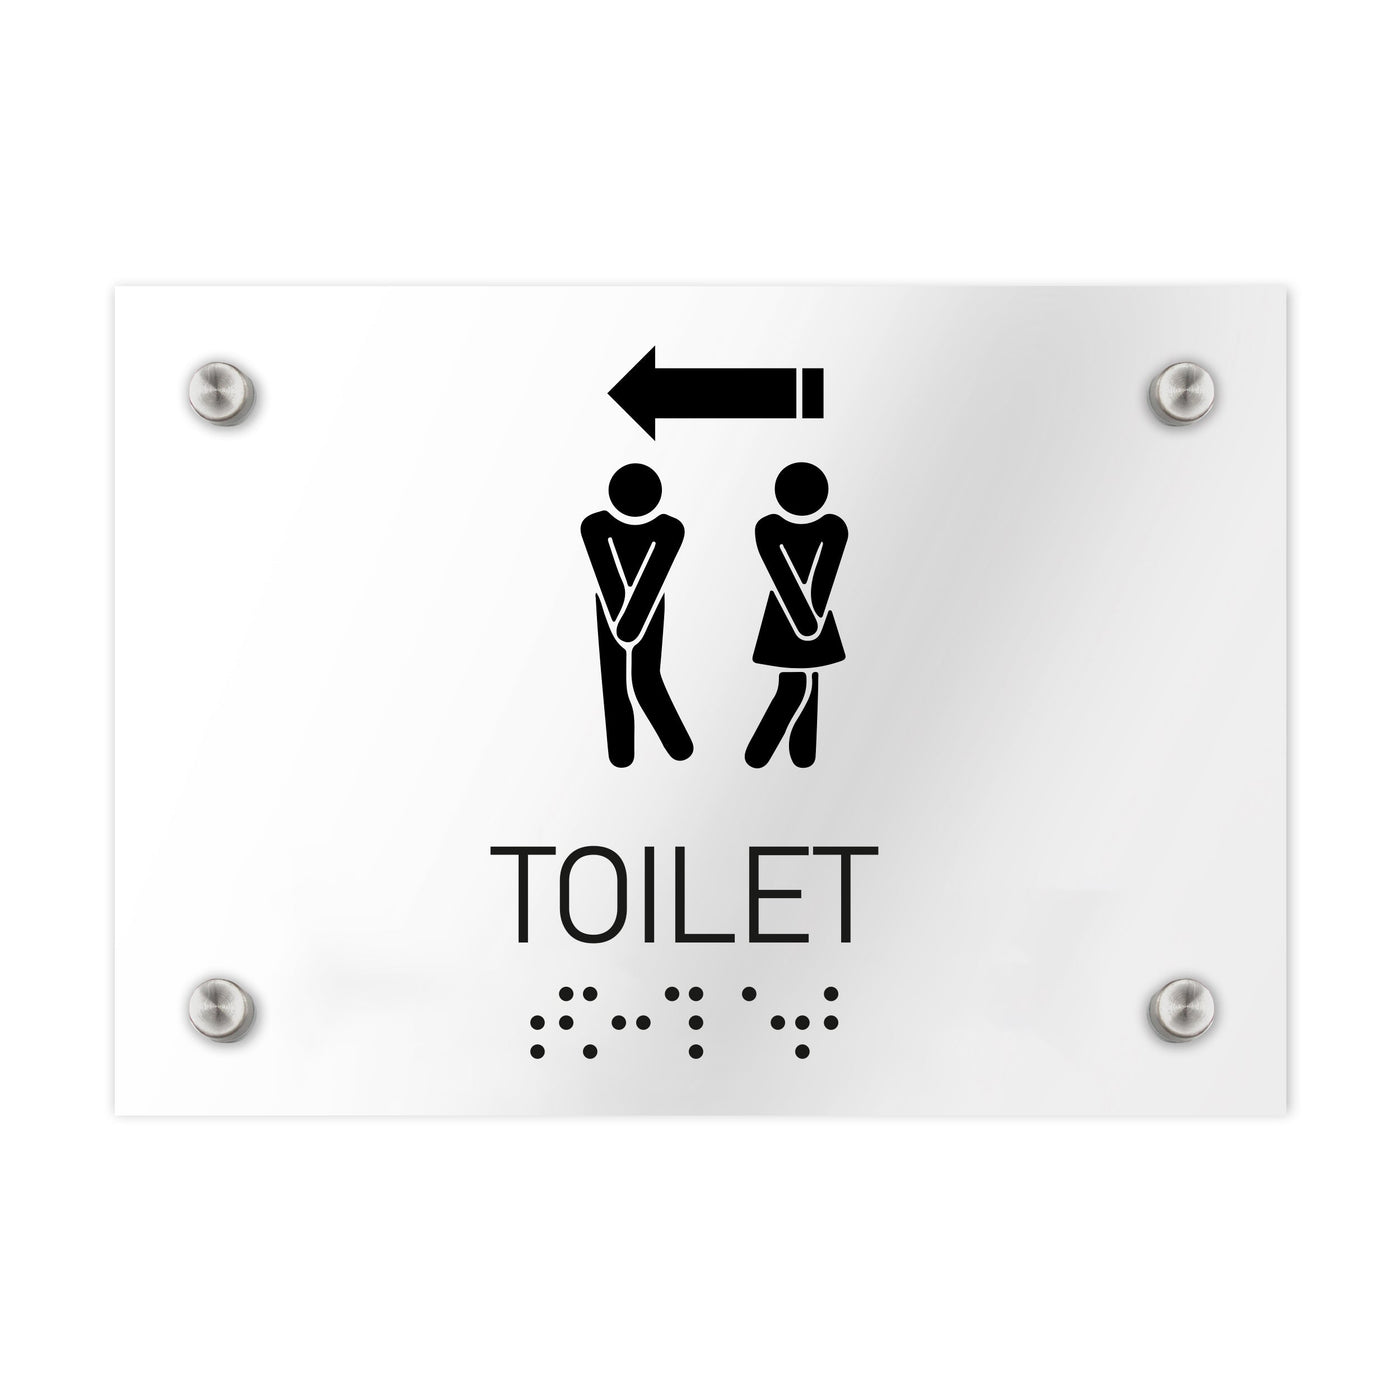 Bathroom Signs - Men & Women Directional Toilet Sign - Clear Acrylic